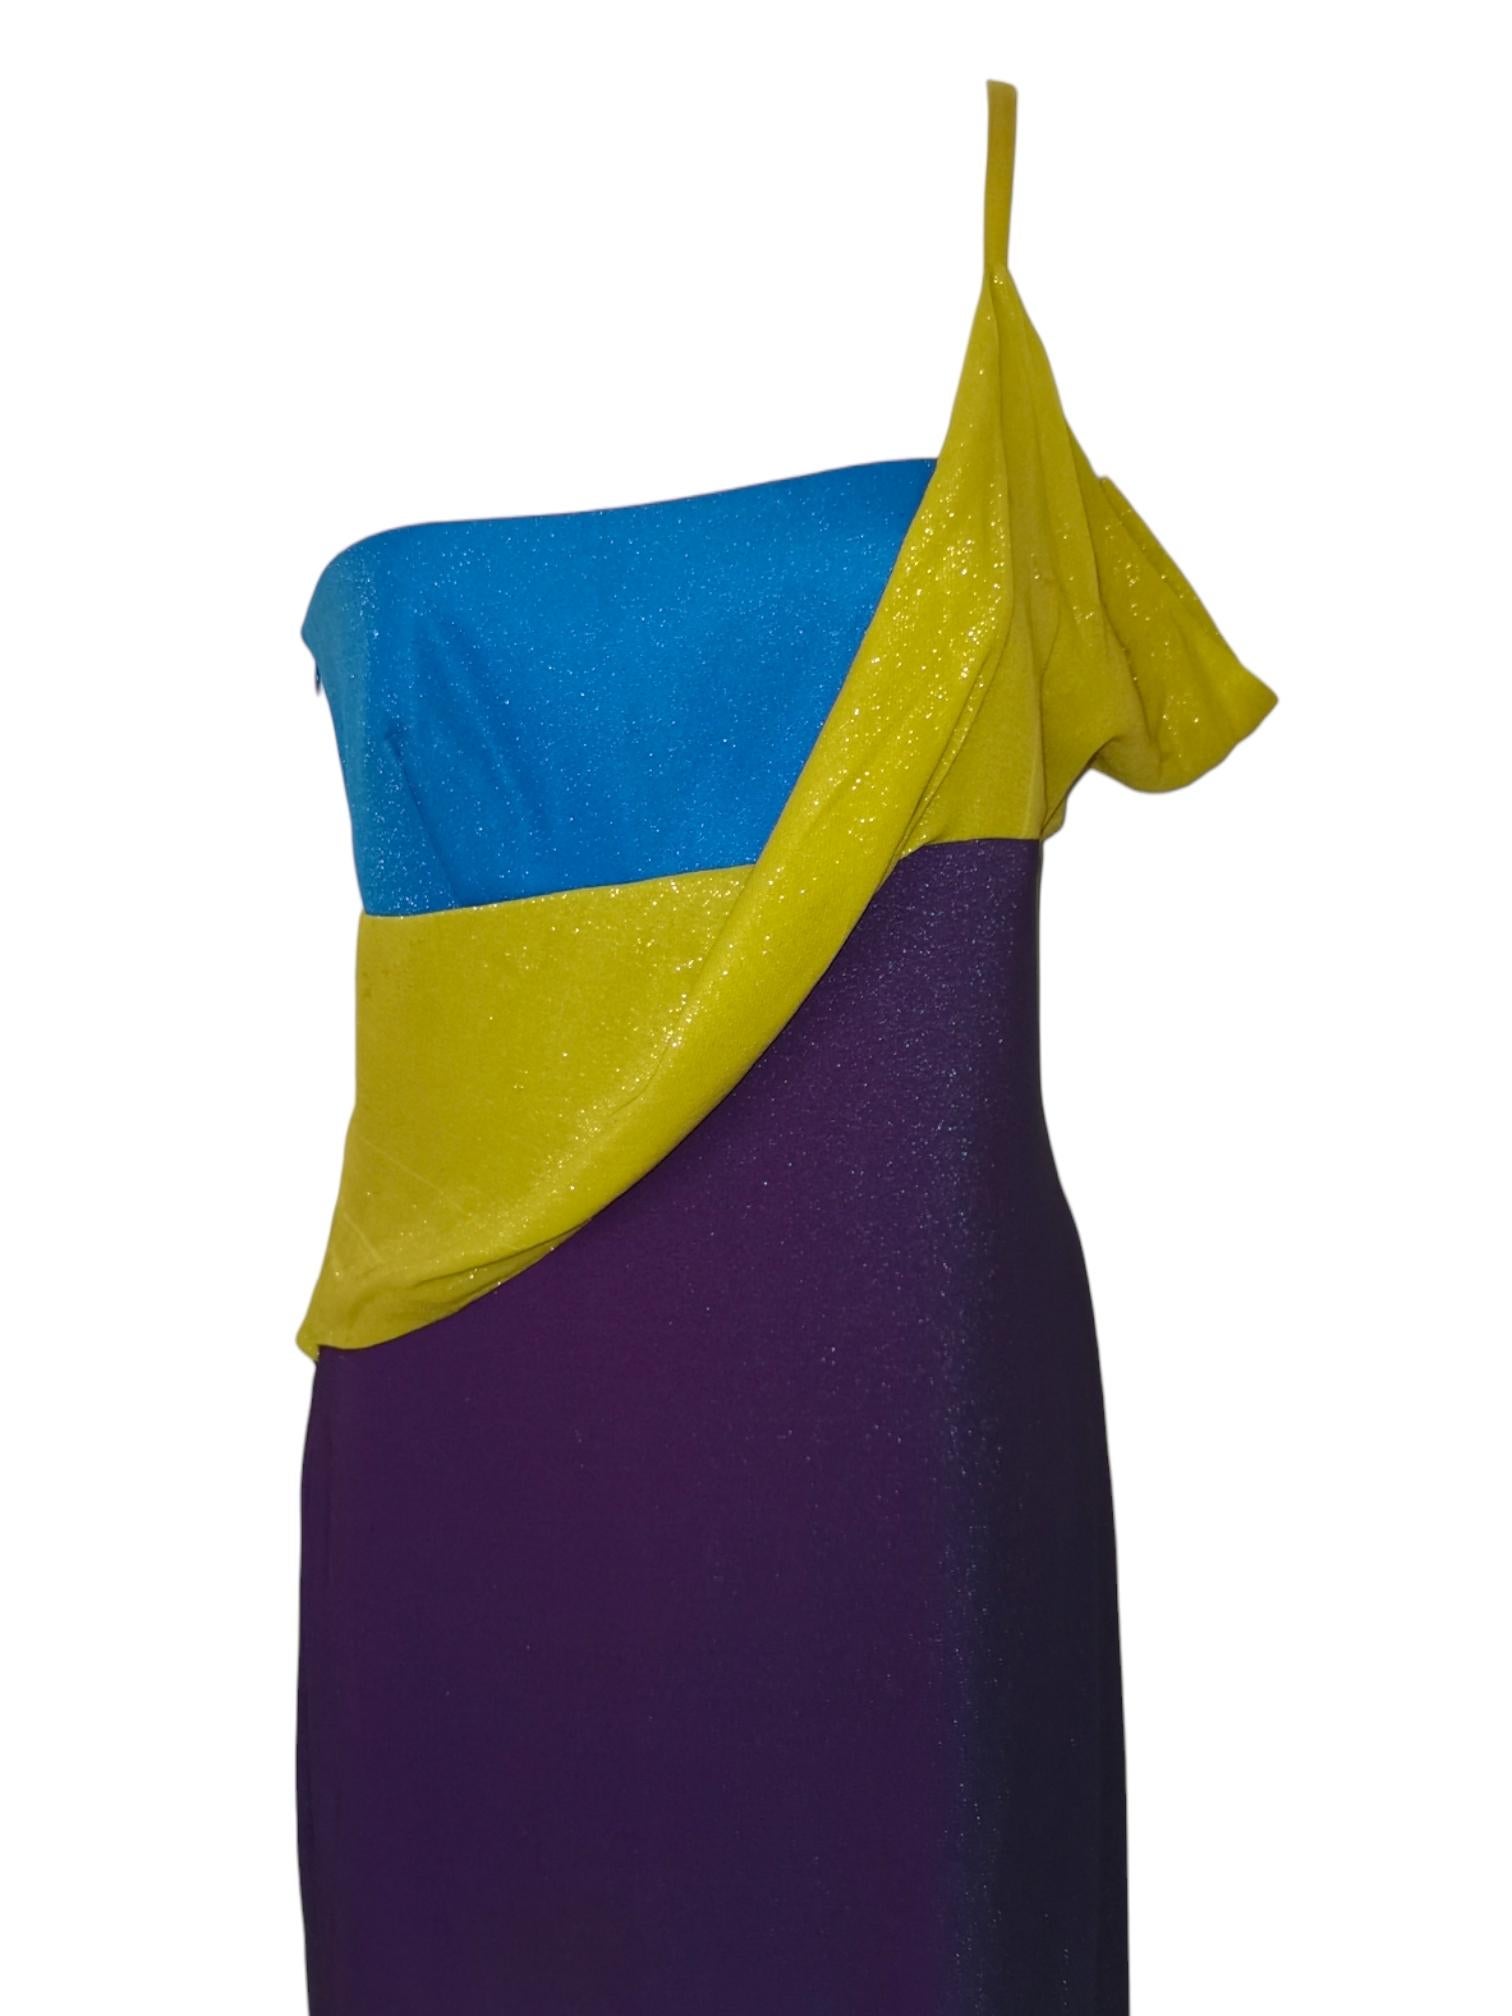 My Runway Archive presents this very rare runway gown from the Versace FW 1997 collection in the signature Versace colour block.
Material: Viscose, nylon, silk and acetate blend. 
Size: Label missing but fits like a UK size 8
Condition: Overall very